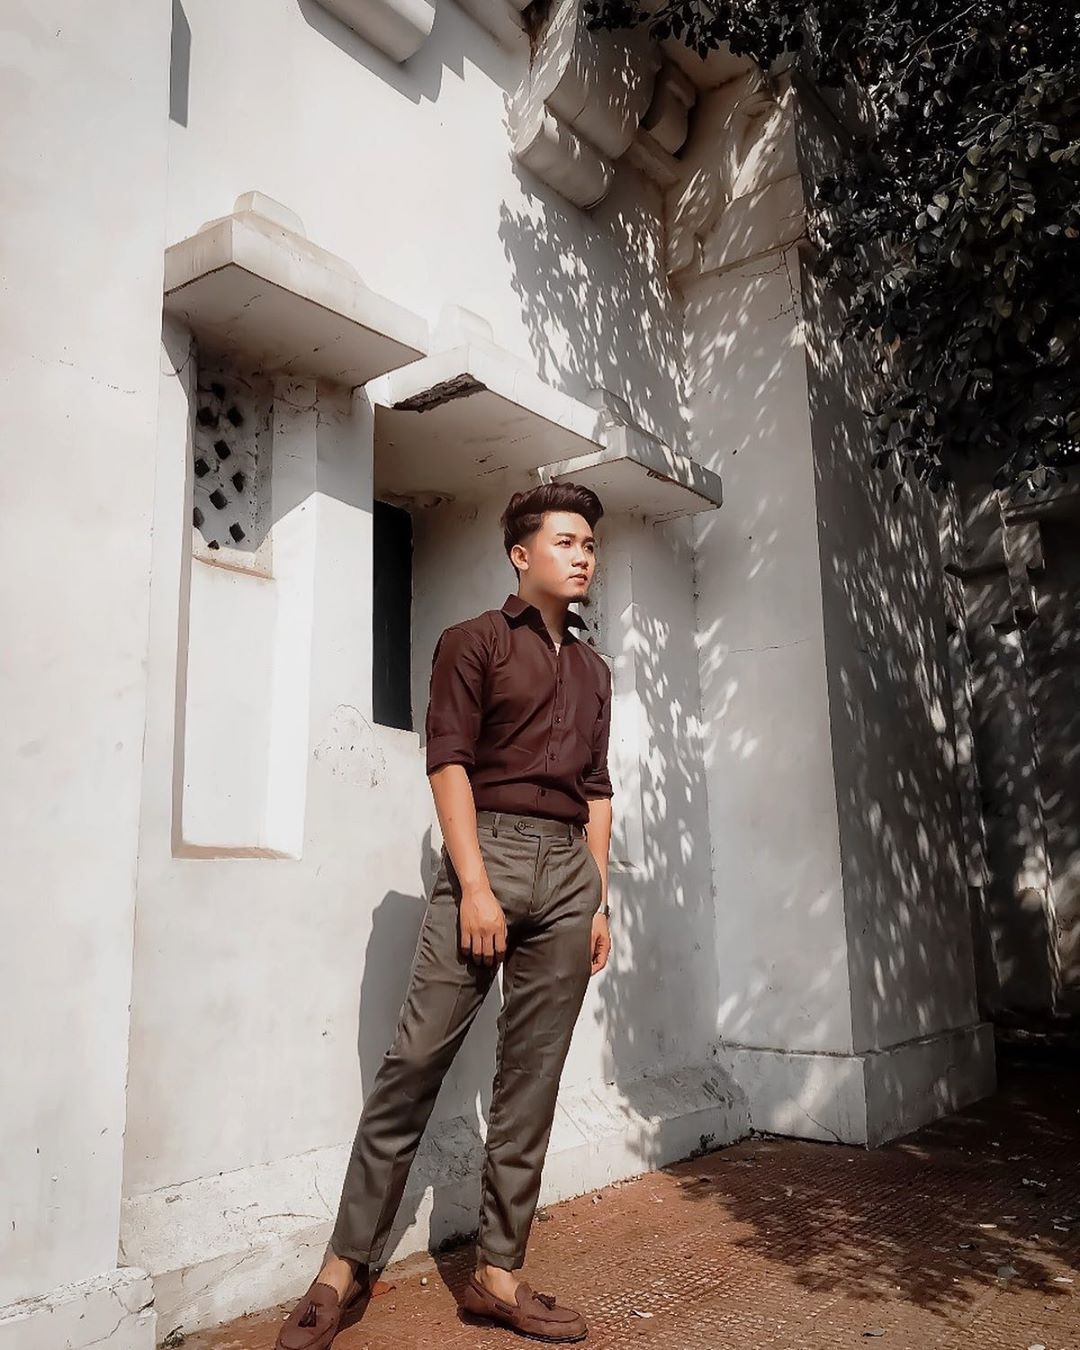 MYNTRA - Regardless age, skin tone or body type, neutral colors are always a good idea. Agrees @thetrendy_hipster
For similar styles, look up product codes: 8989327 / 9636275 / 2079107
For more style...